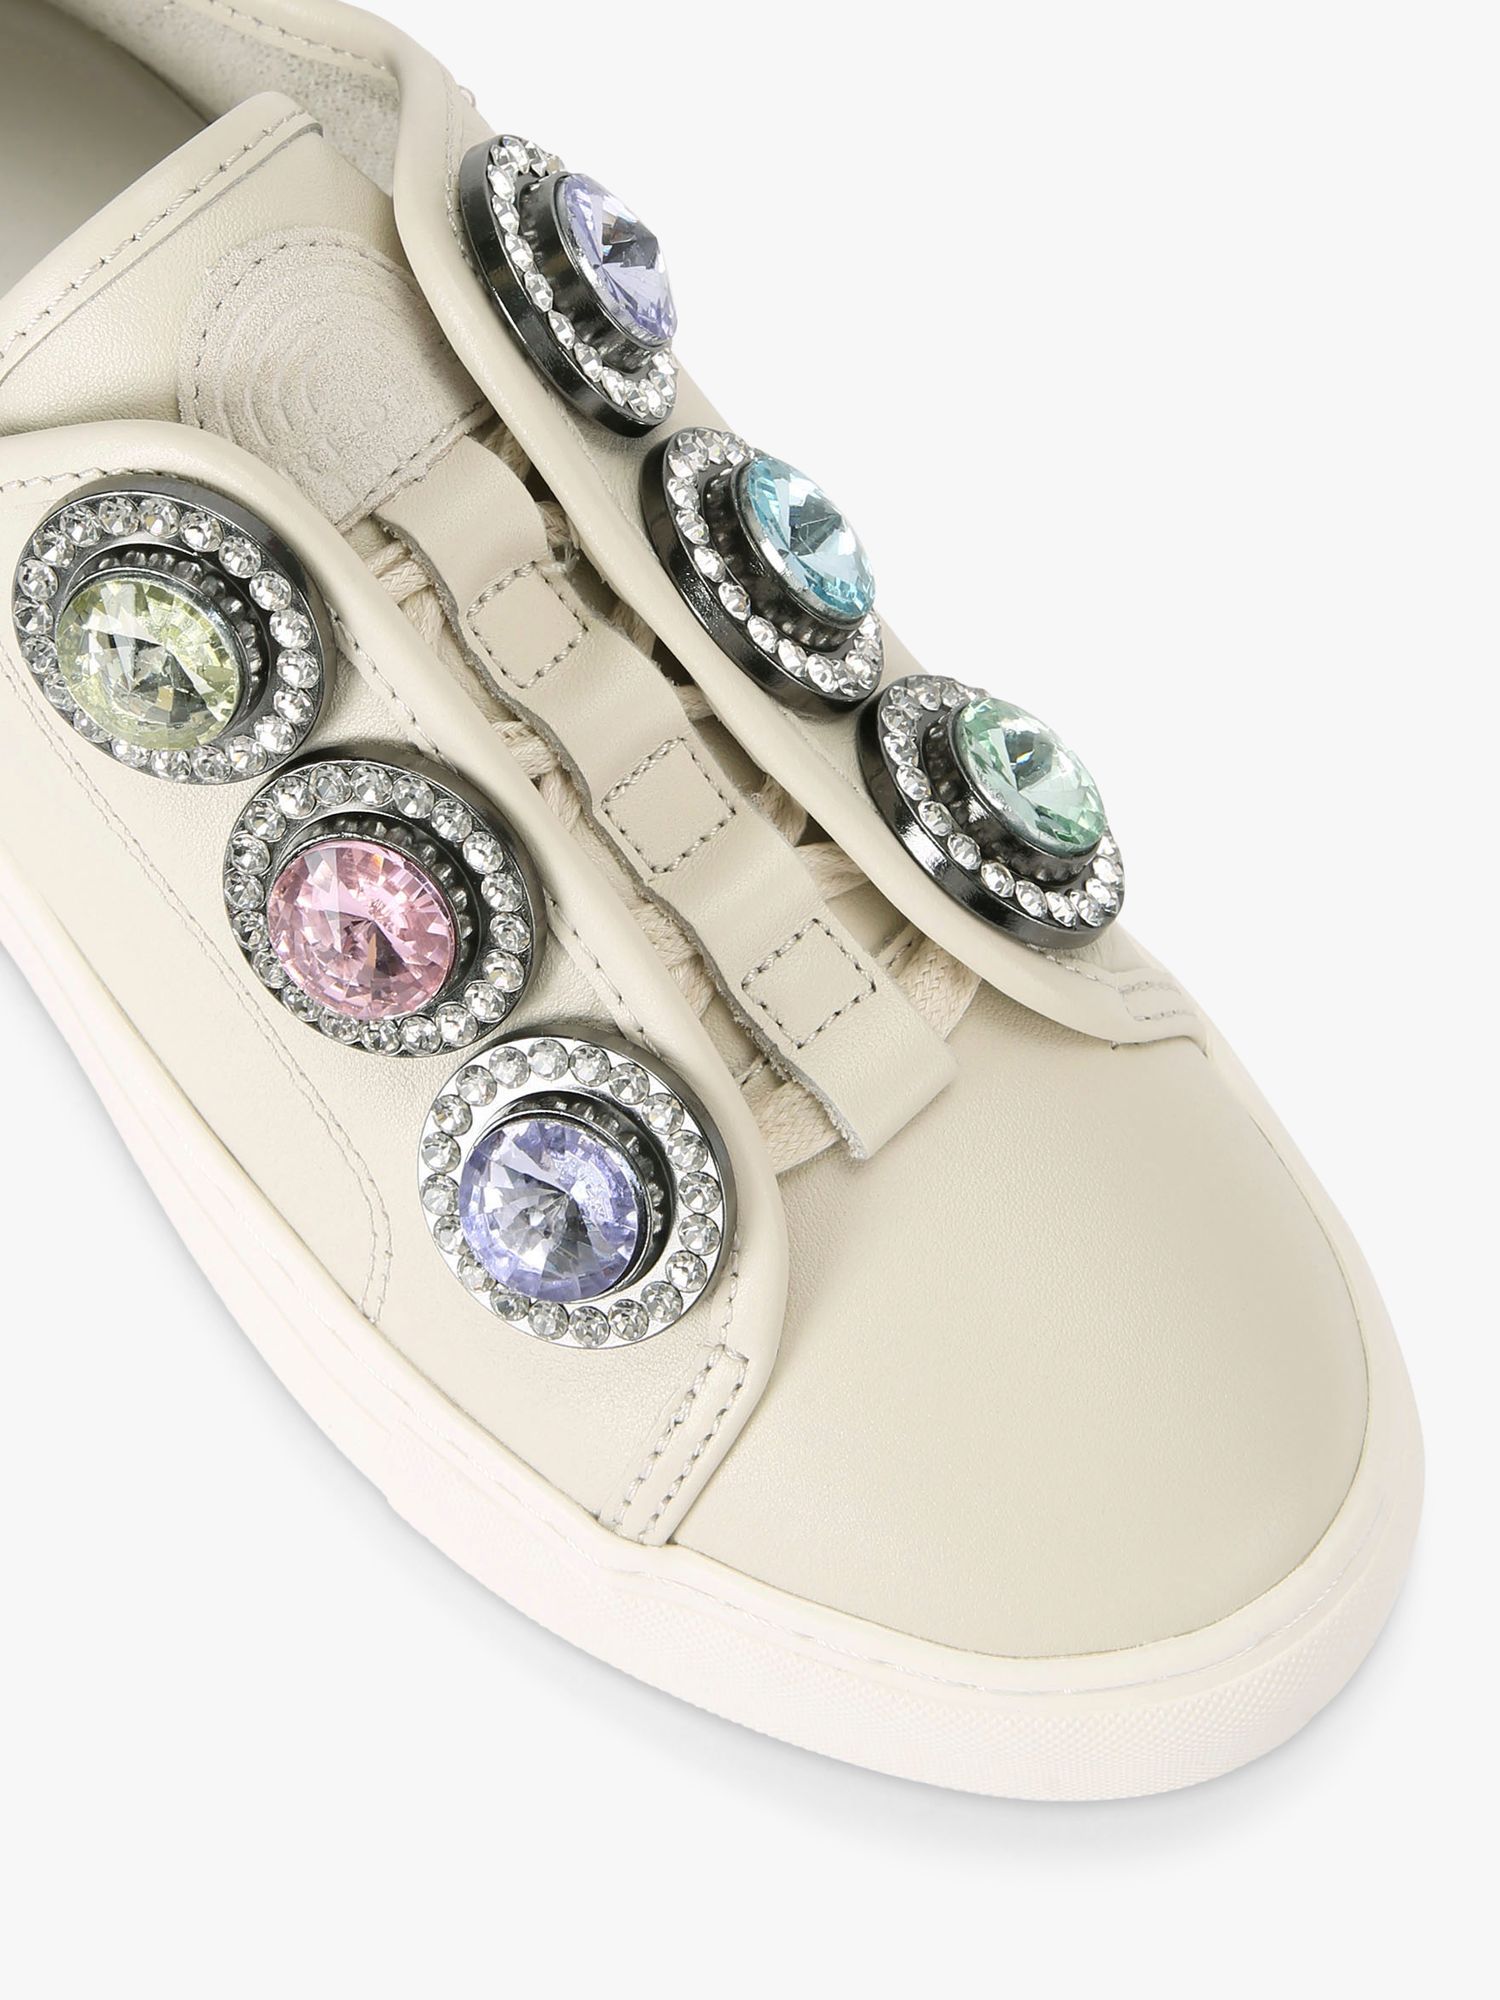 Buy Kurt Geiger London Laney Octavia Leather Trainers, Natural Putty Online at johnlewis.com